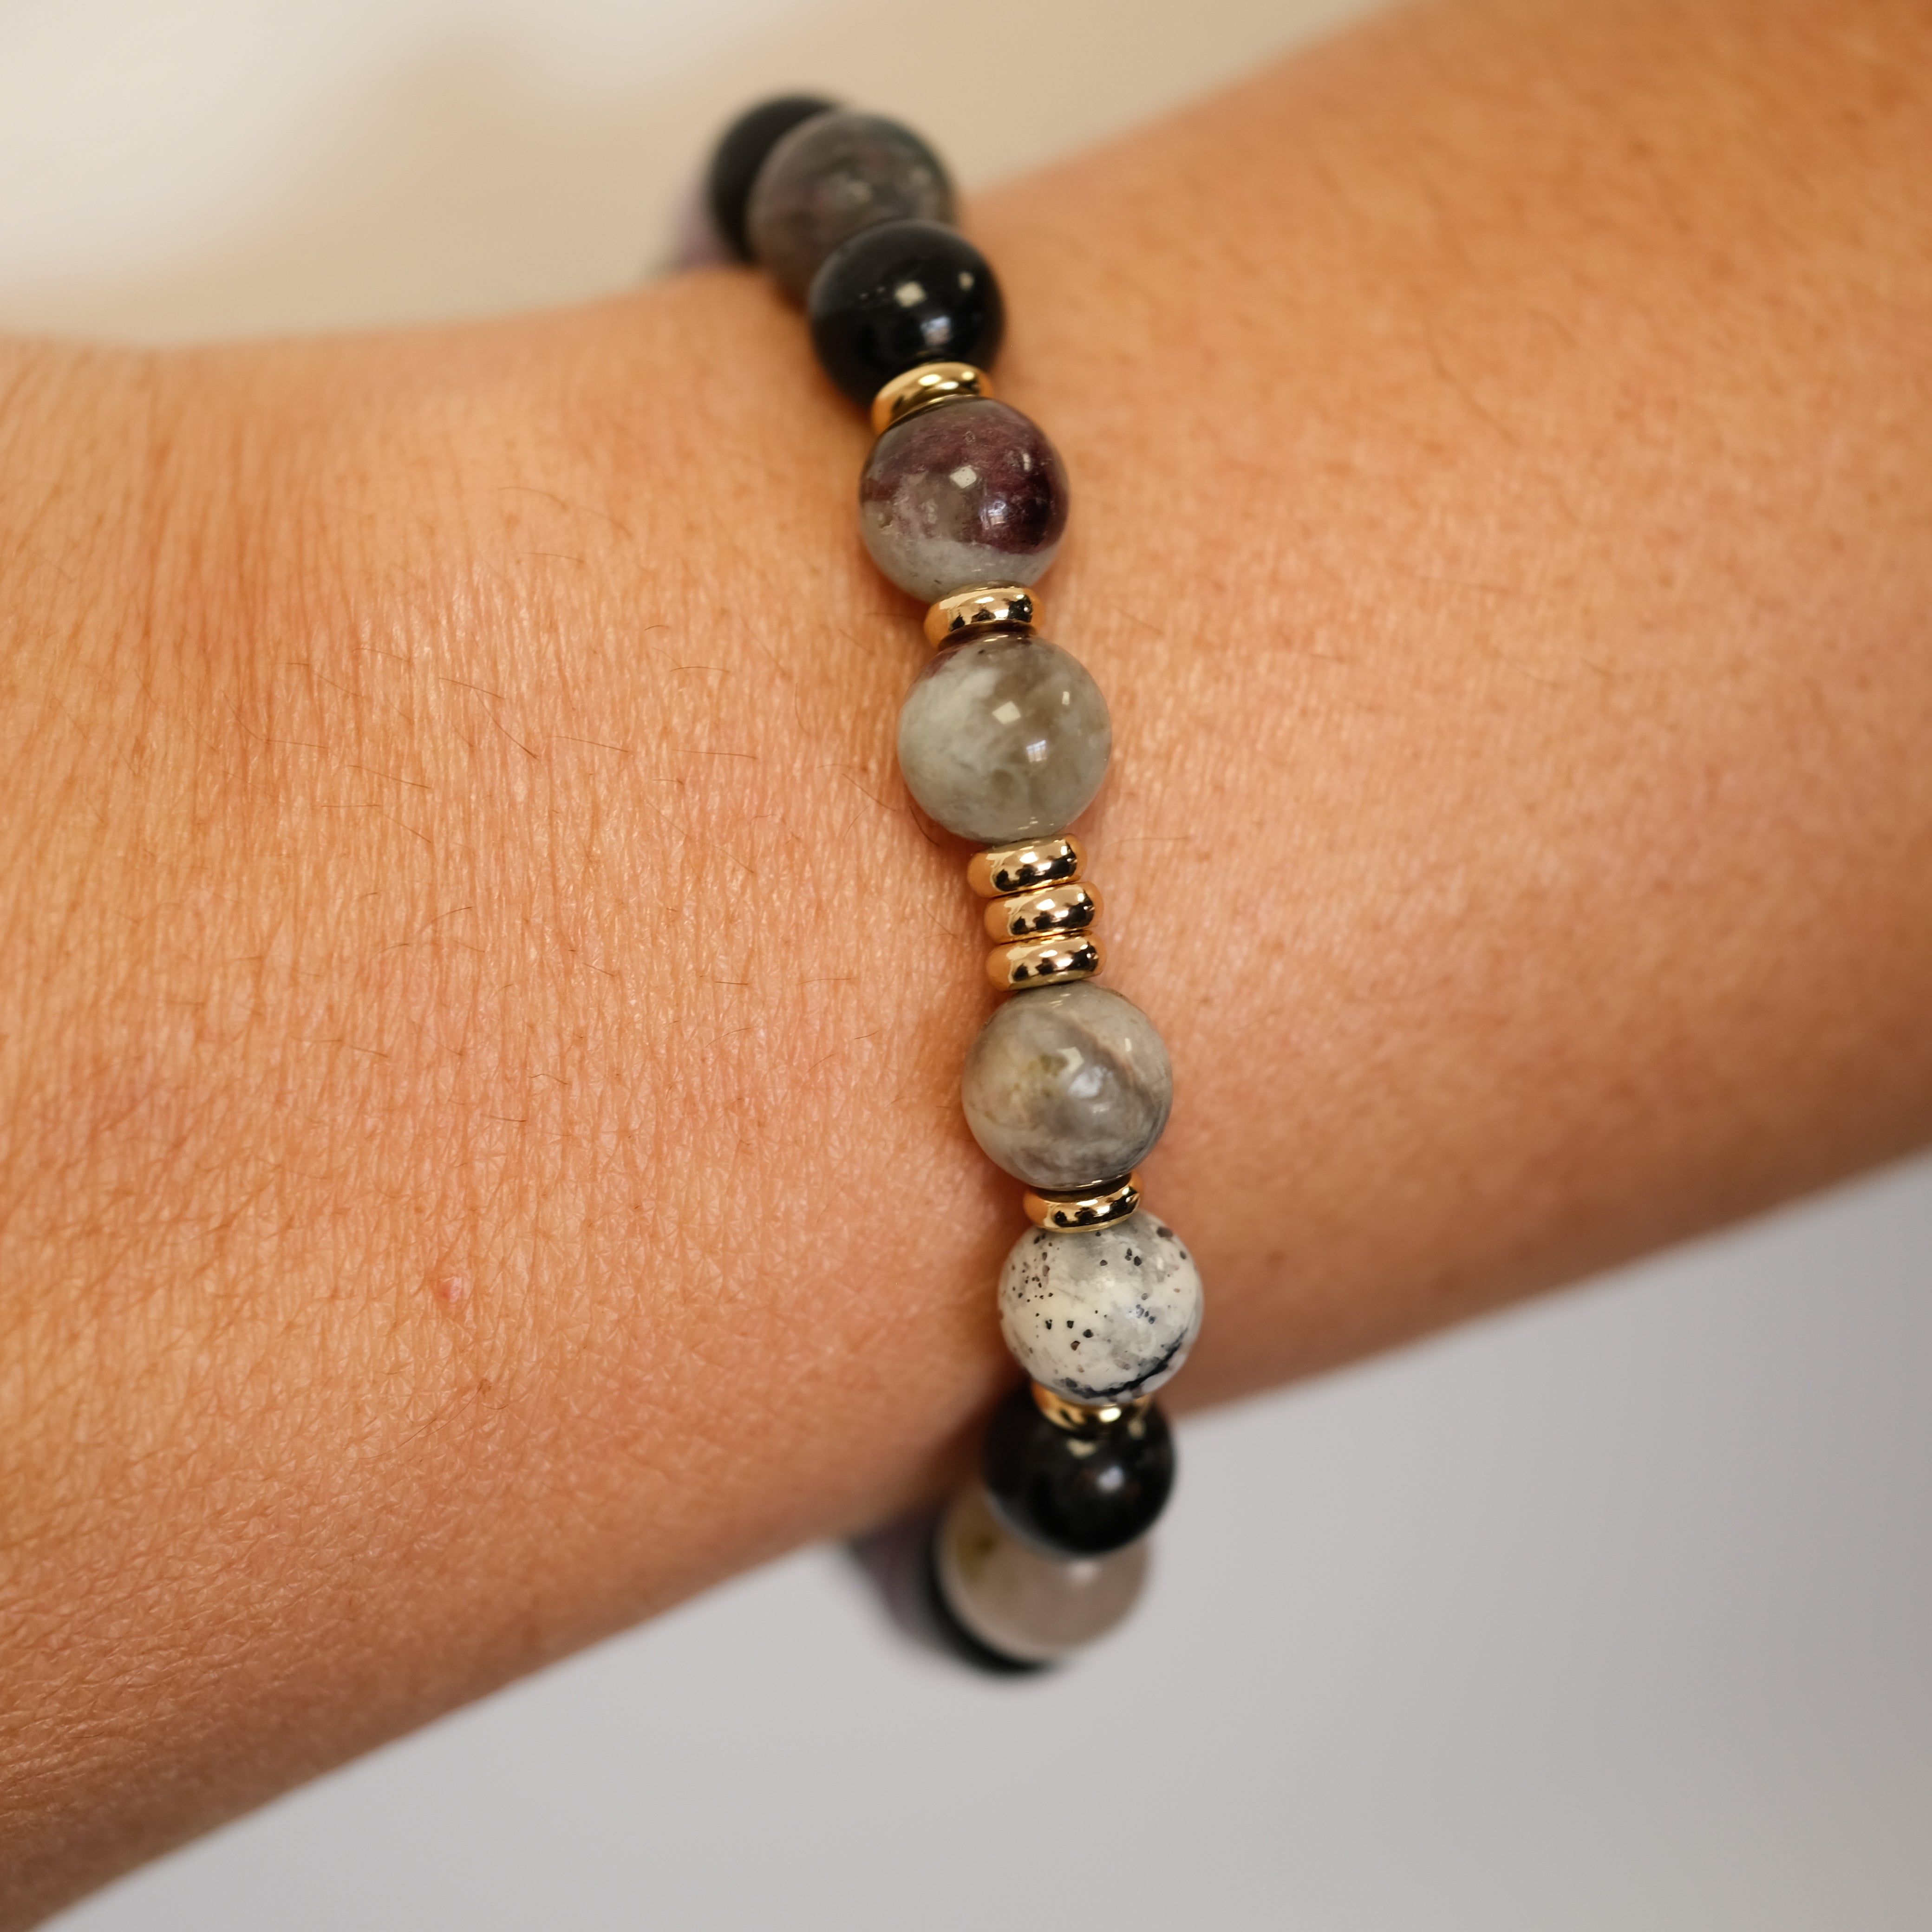 A multi-coloured tourmaline bracelet with gold accessories worn on a model's wrist